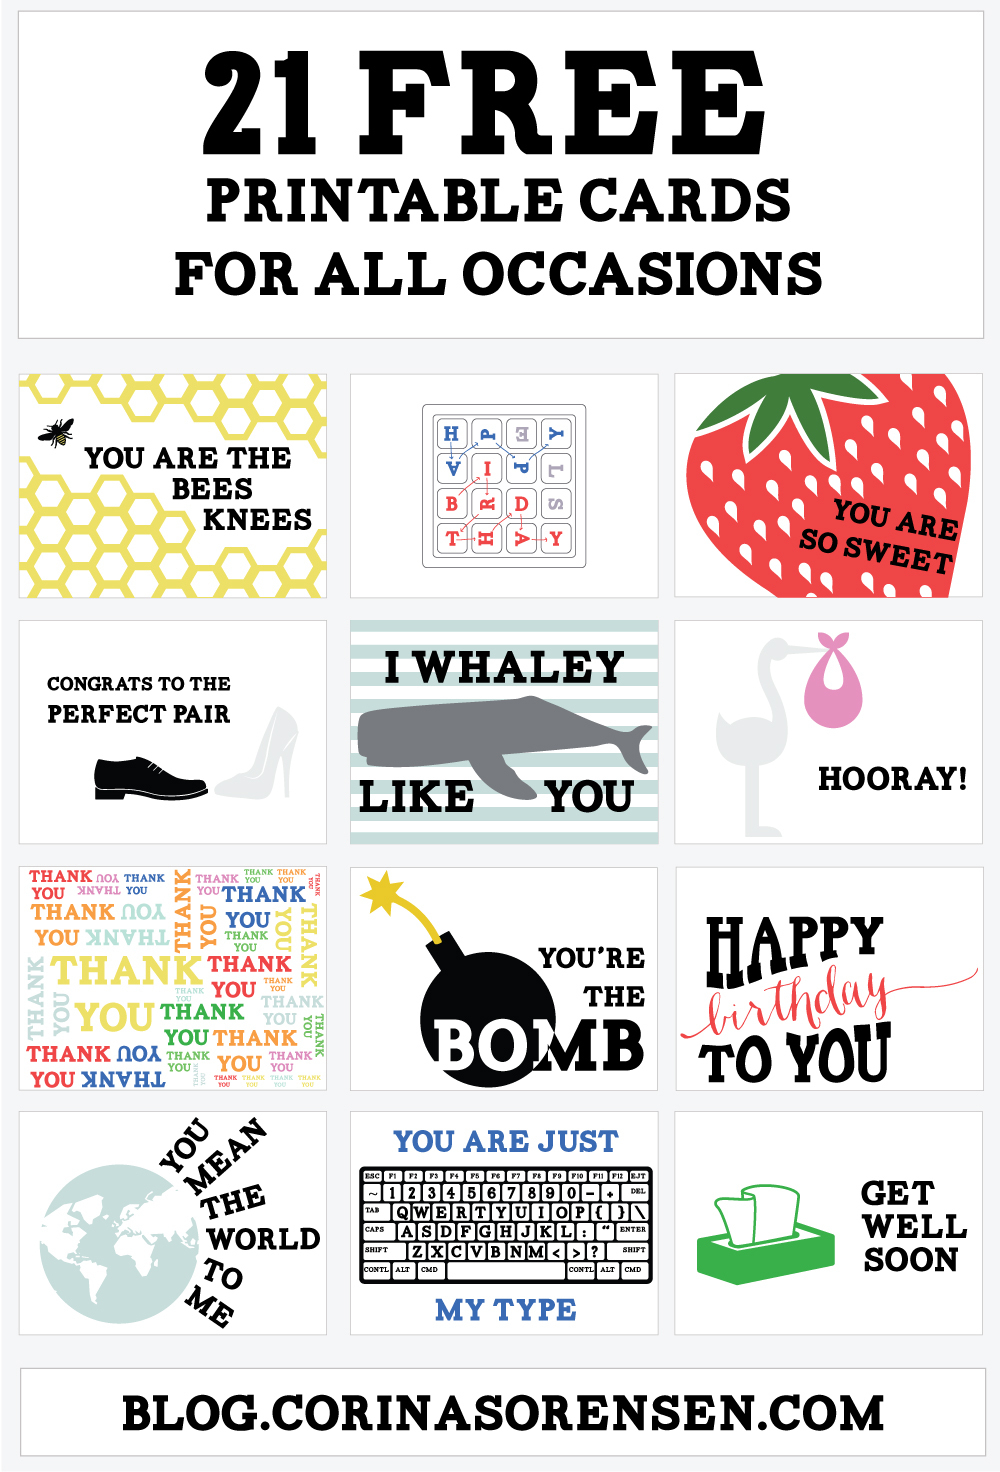 Free Printable Greeting Cards For All Occasions | Download Them Or Print - Free Printable Cards For All Occasions